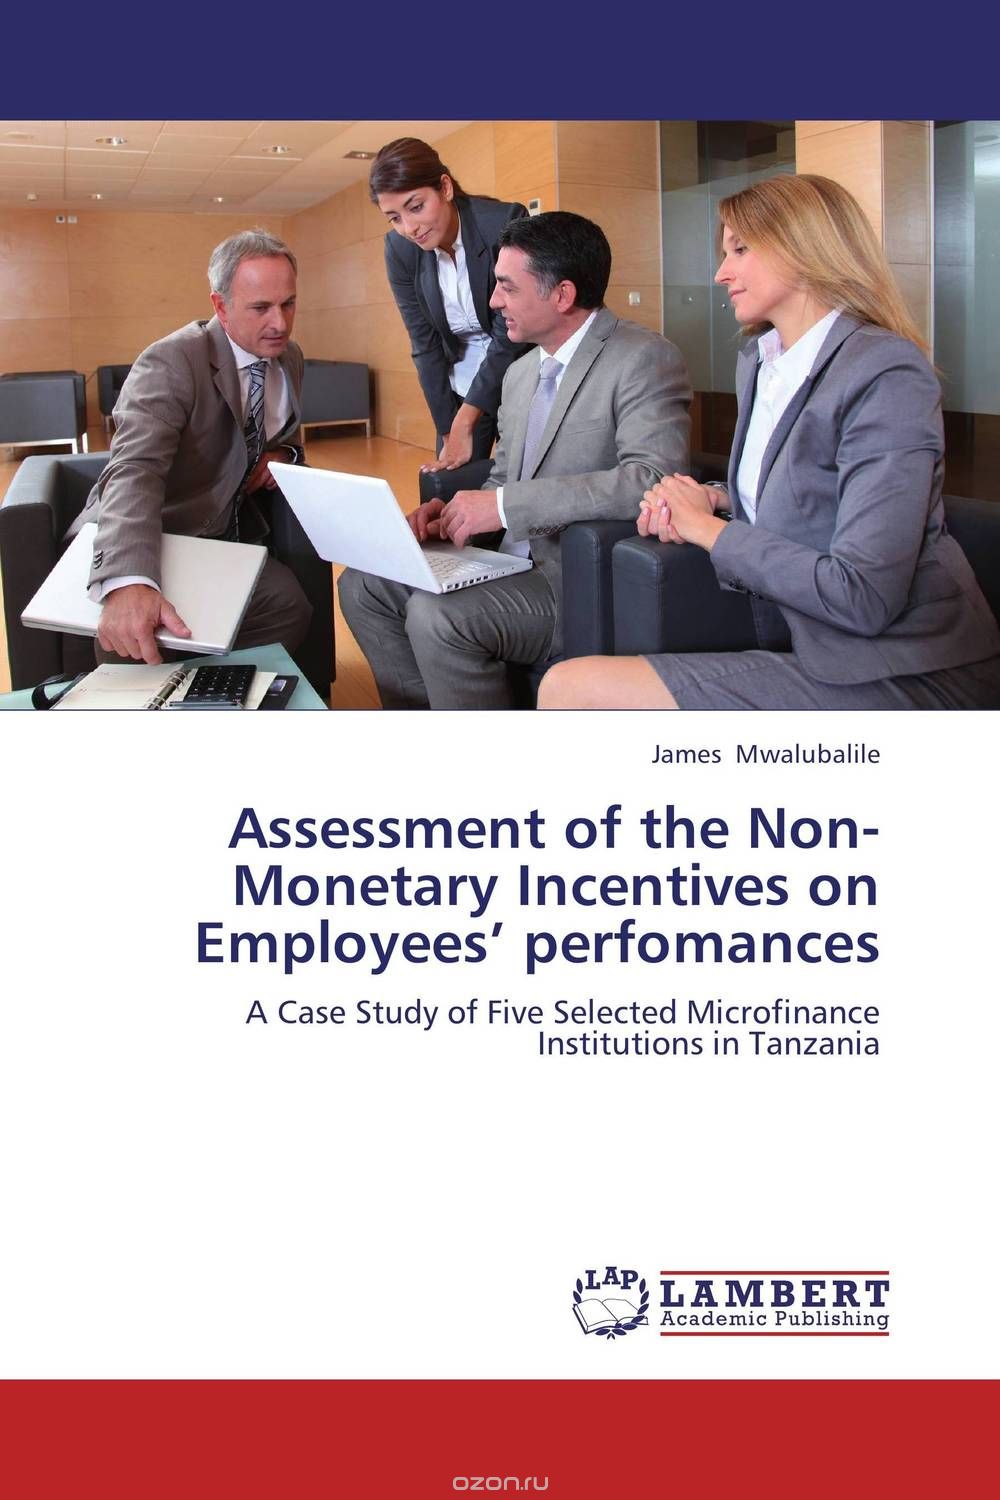 Assessment of the Non-Monetary Incentives on Employees’ perfomances